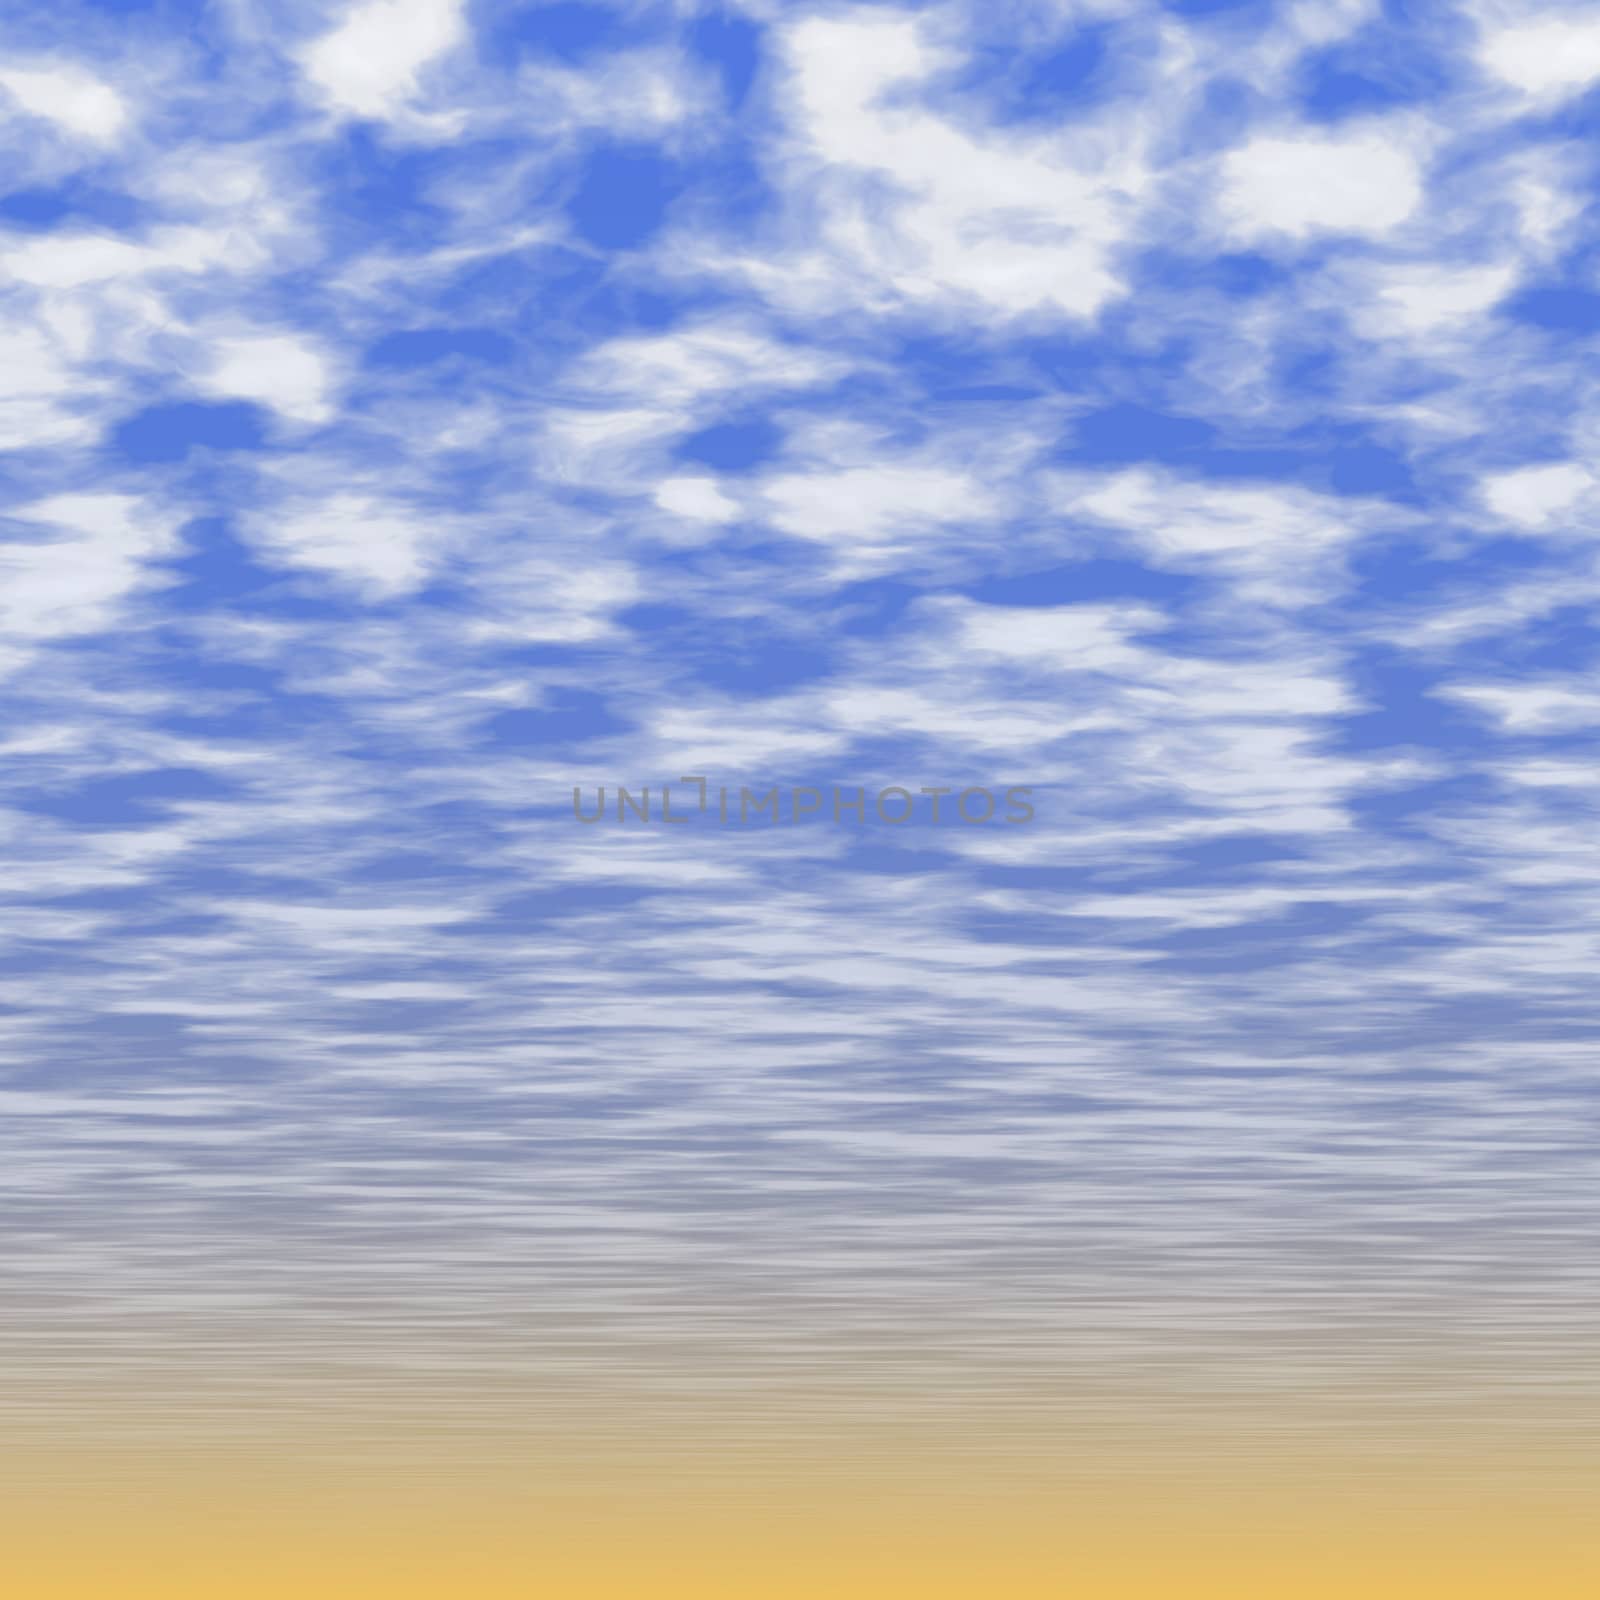 Blank sky surface with small clouds by sfinks